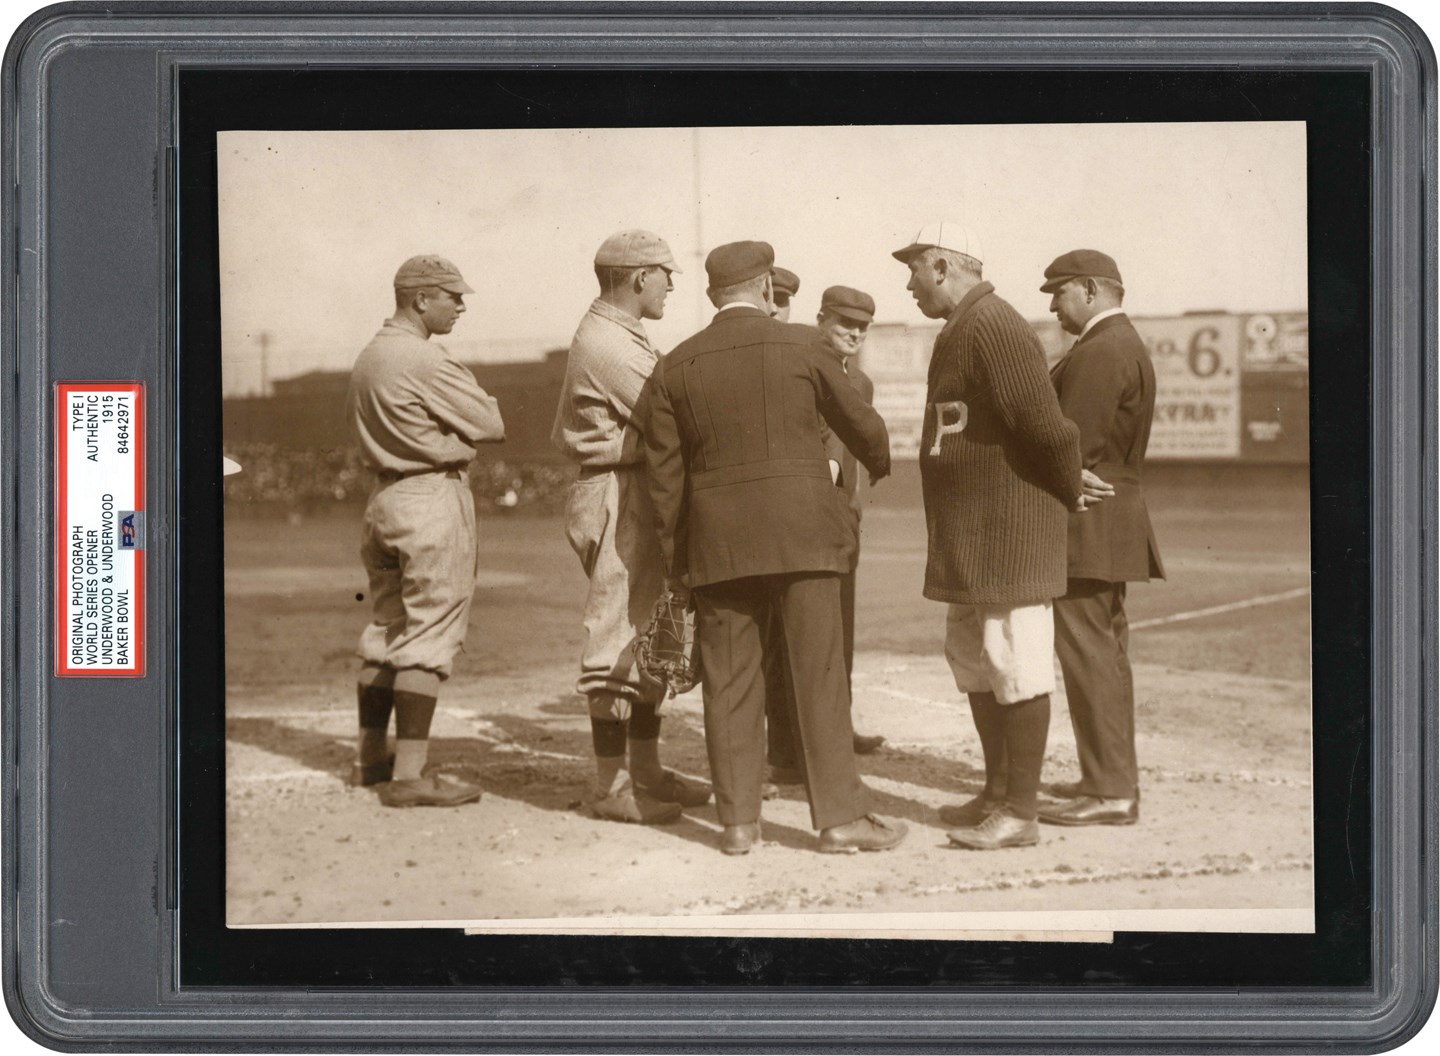 The Brown Brothers Photograph Collection - 1915 World Series Photo Game 1 - Conference at the Plate (PSA Type I)